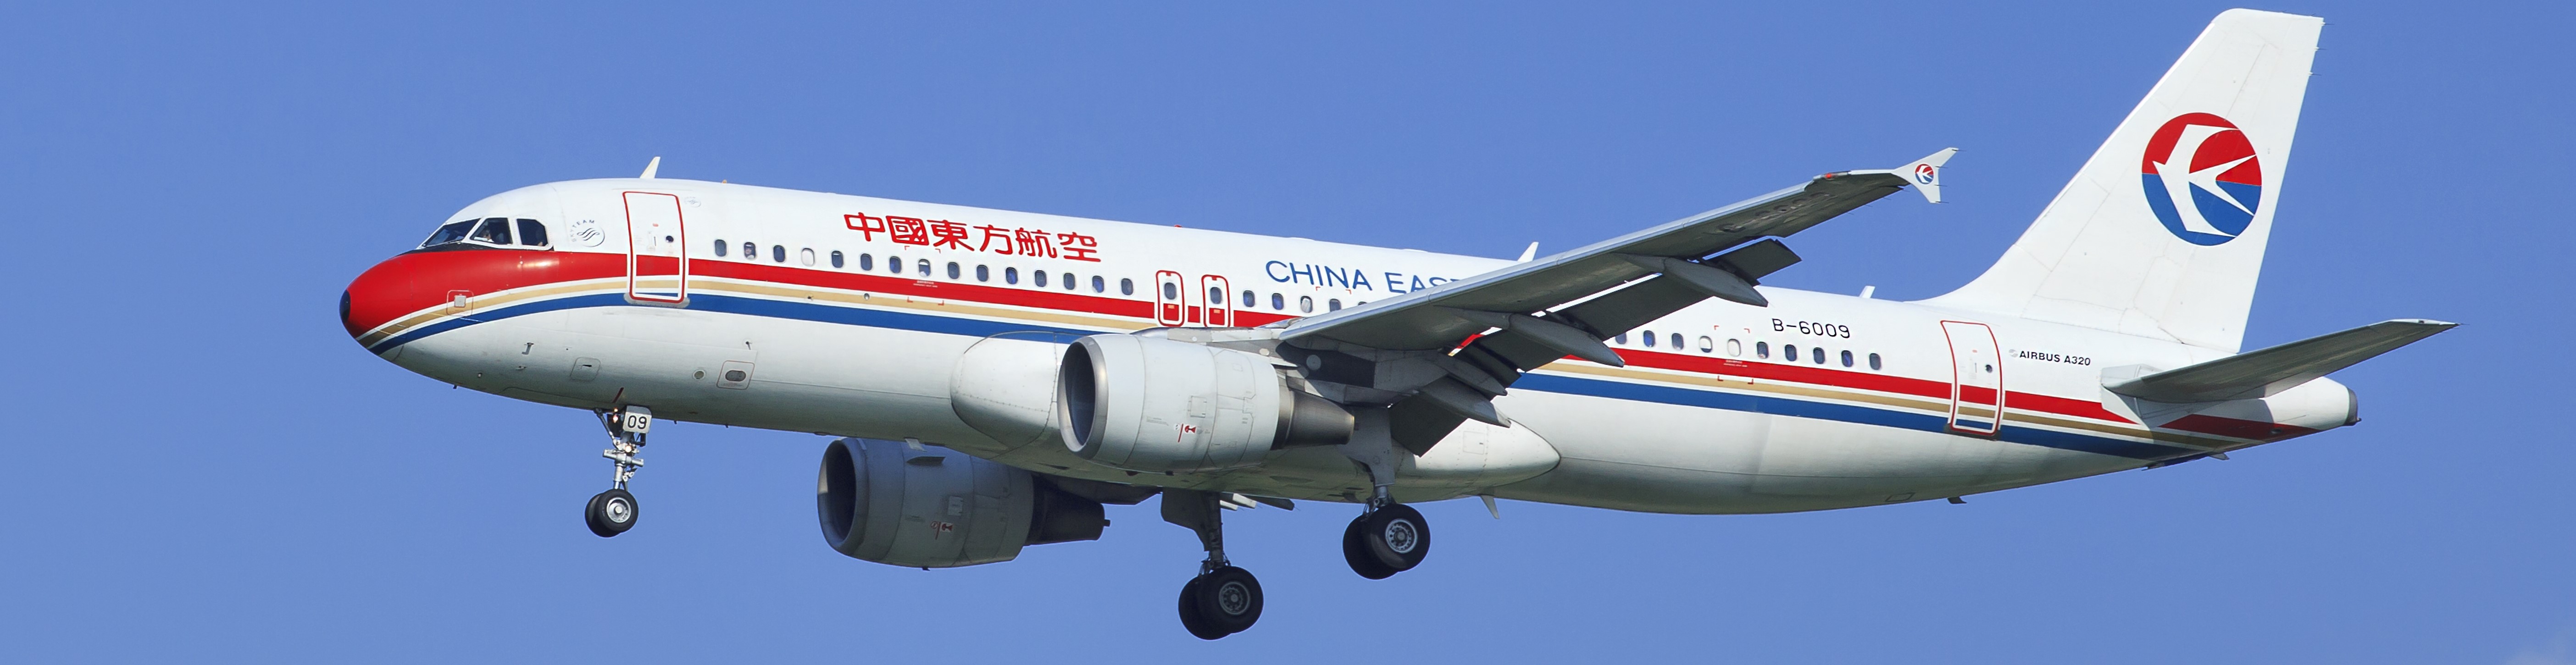 HAITE Singapore to provide pilot training services for China Eastern Airlines